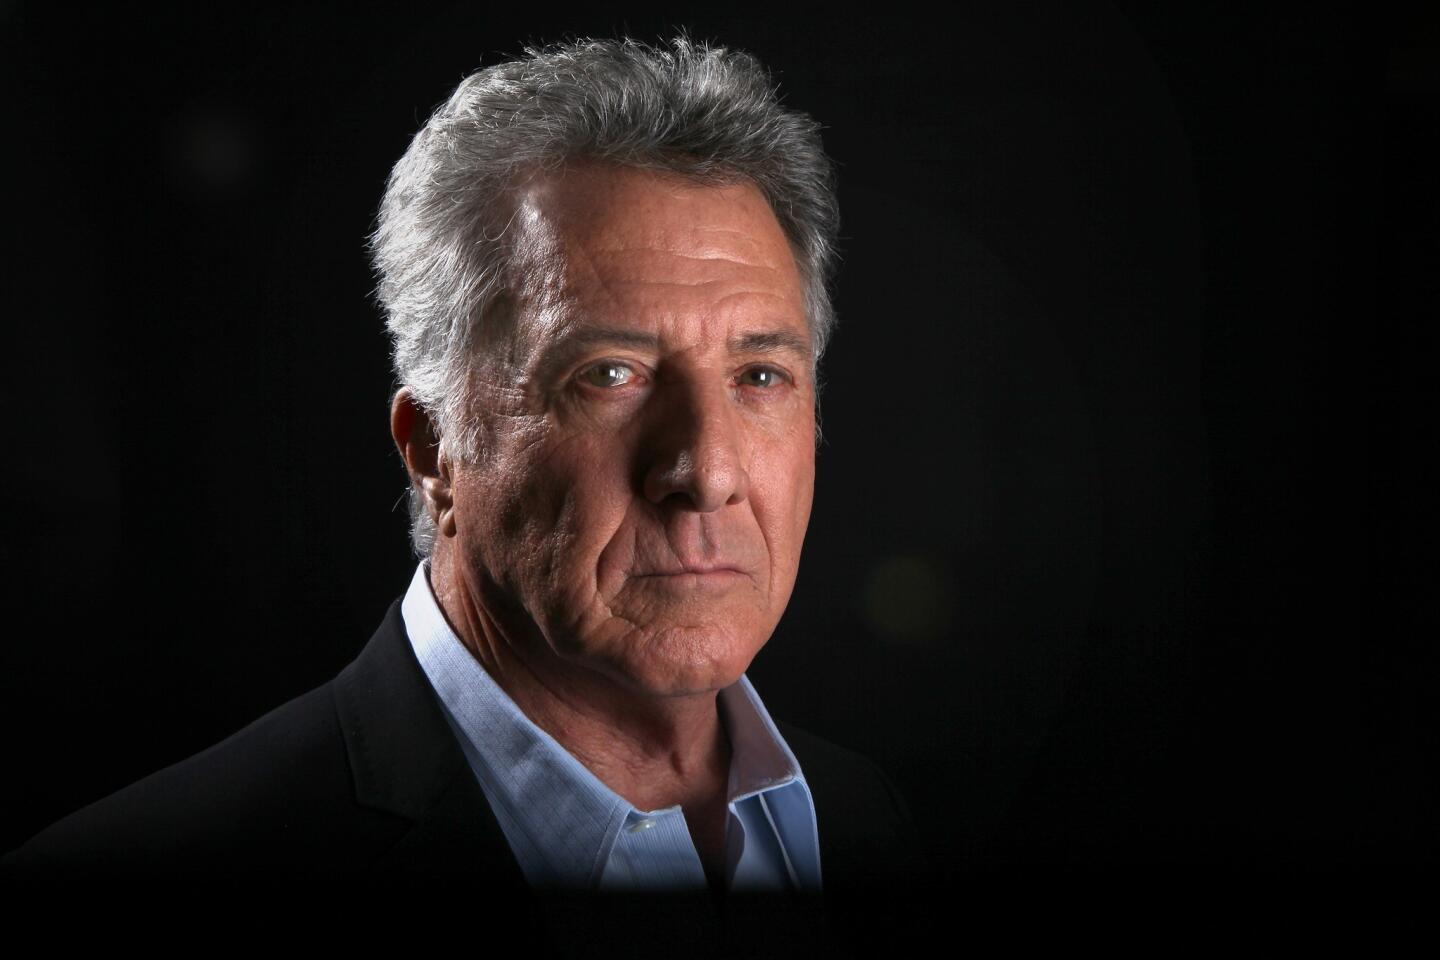 Dustin Hoffman shows remorse for his view of women